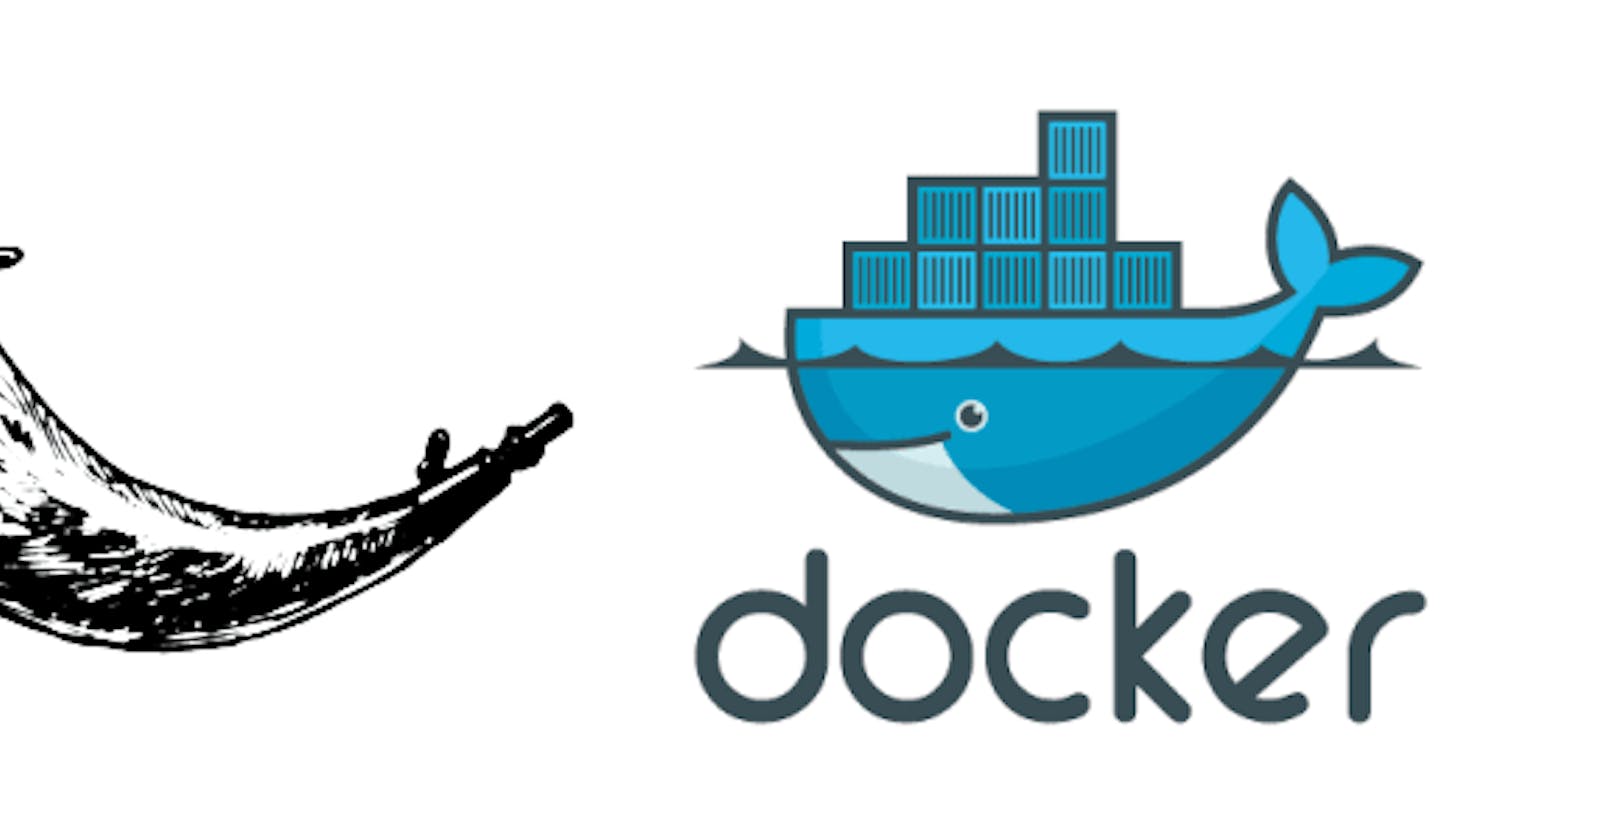 Getting Started with Flask and Docker